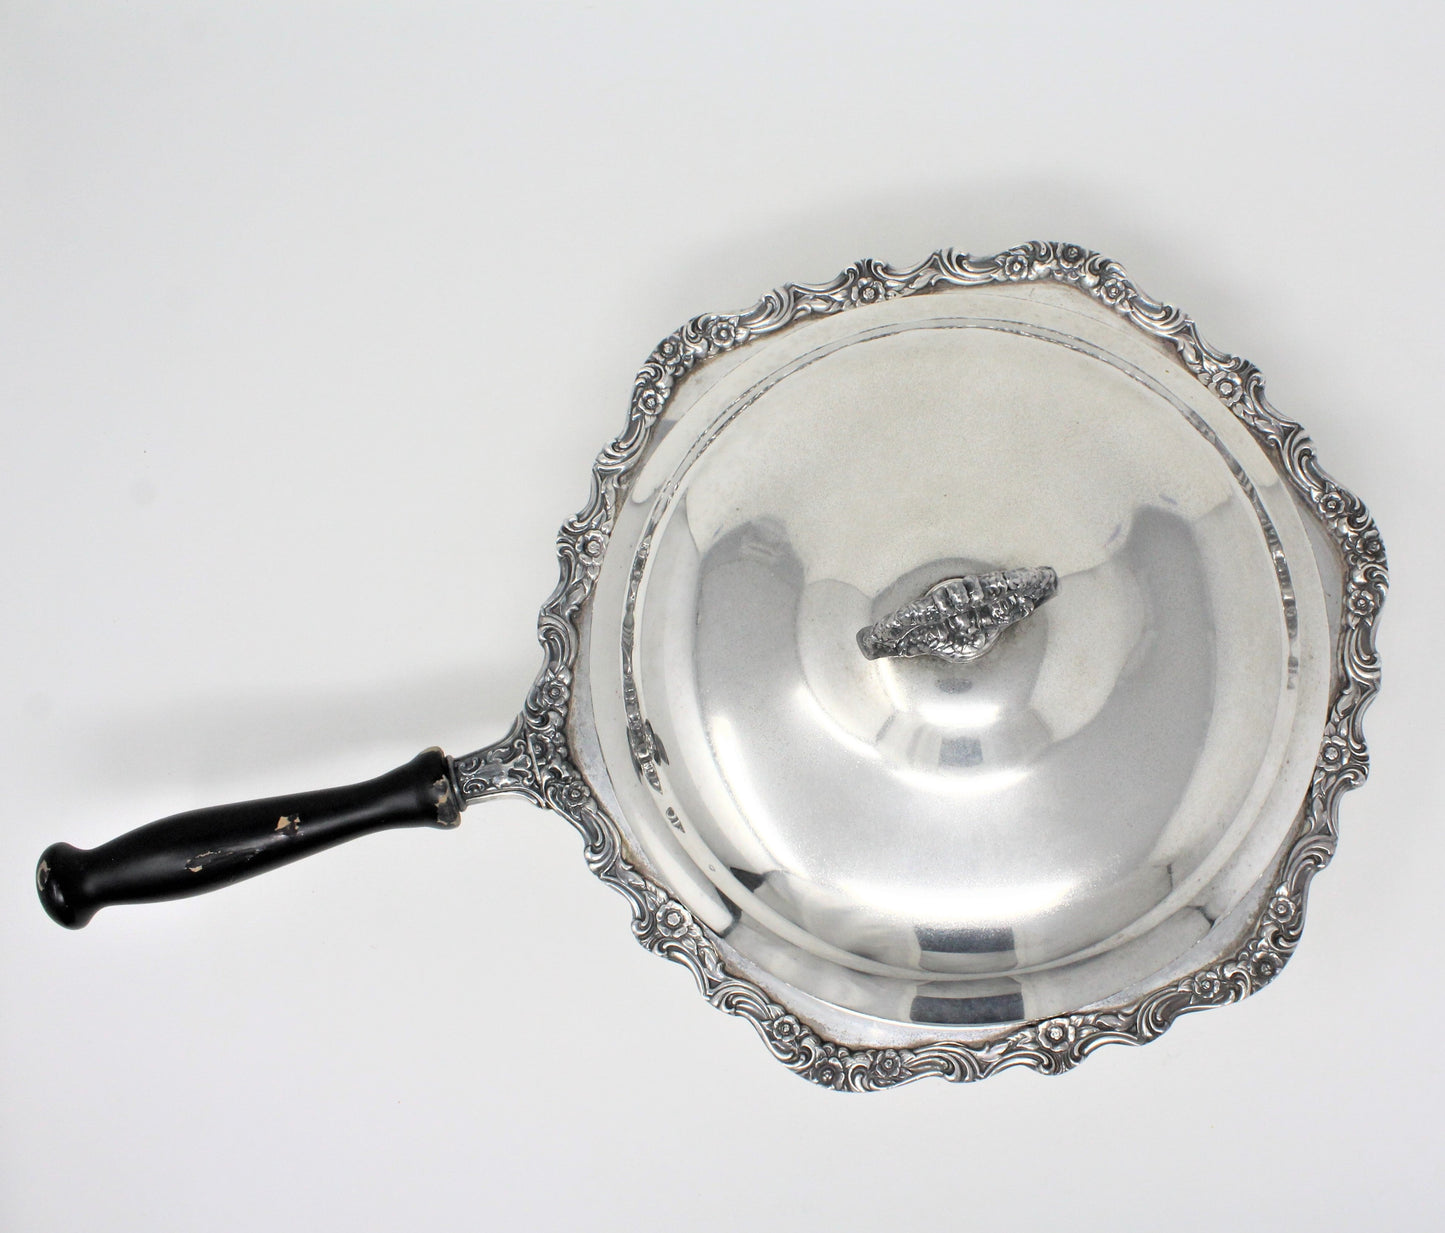 Chafing Dish, International Silver Co, Countess, Silverplate, Vintage